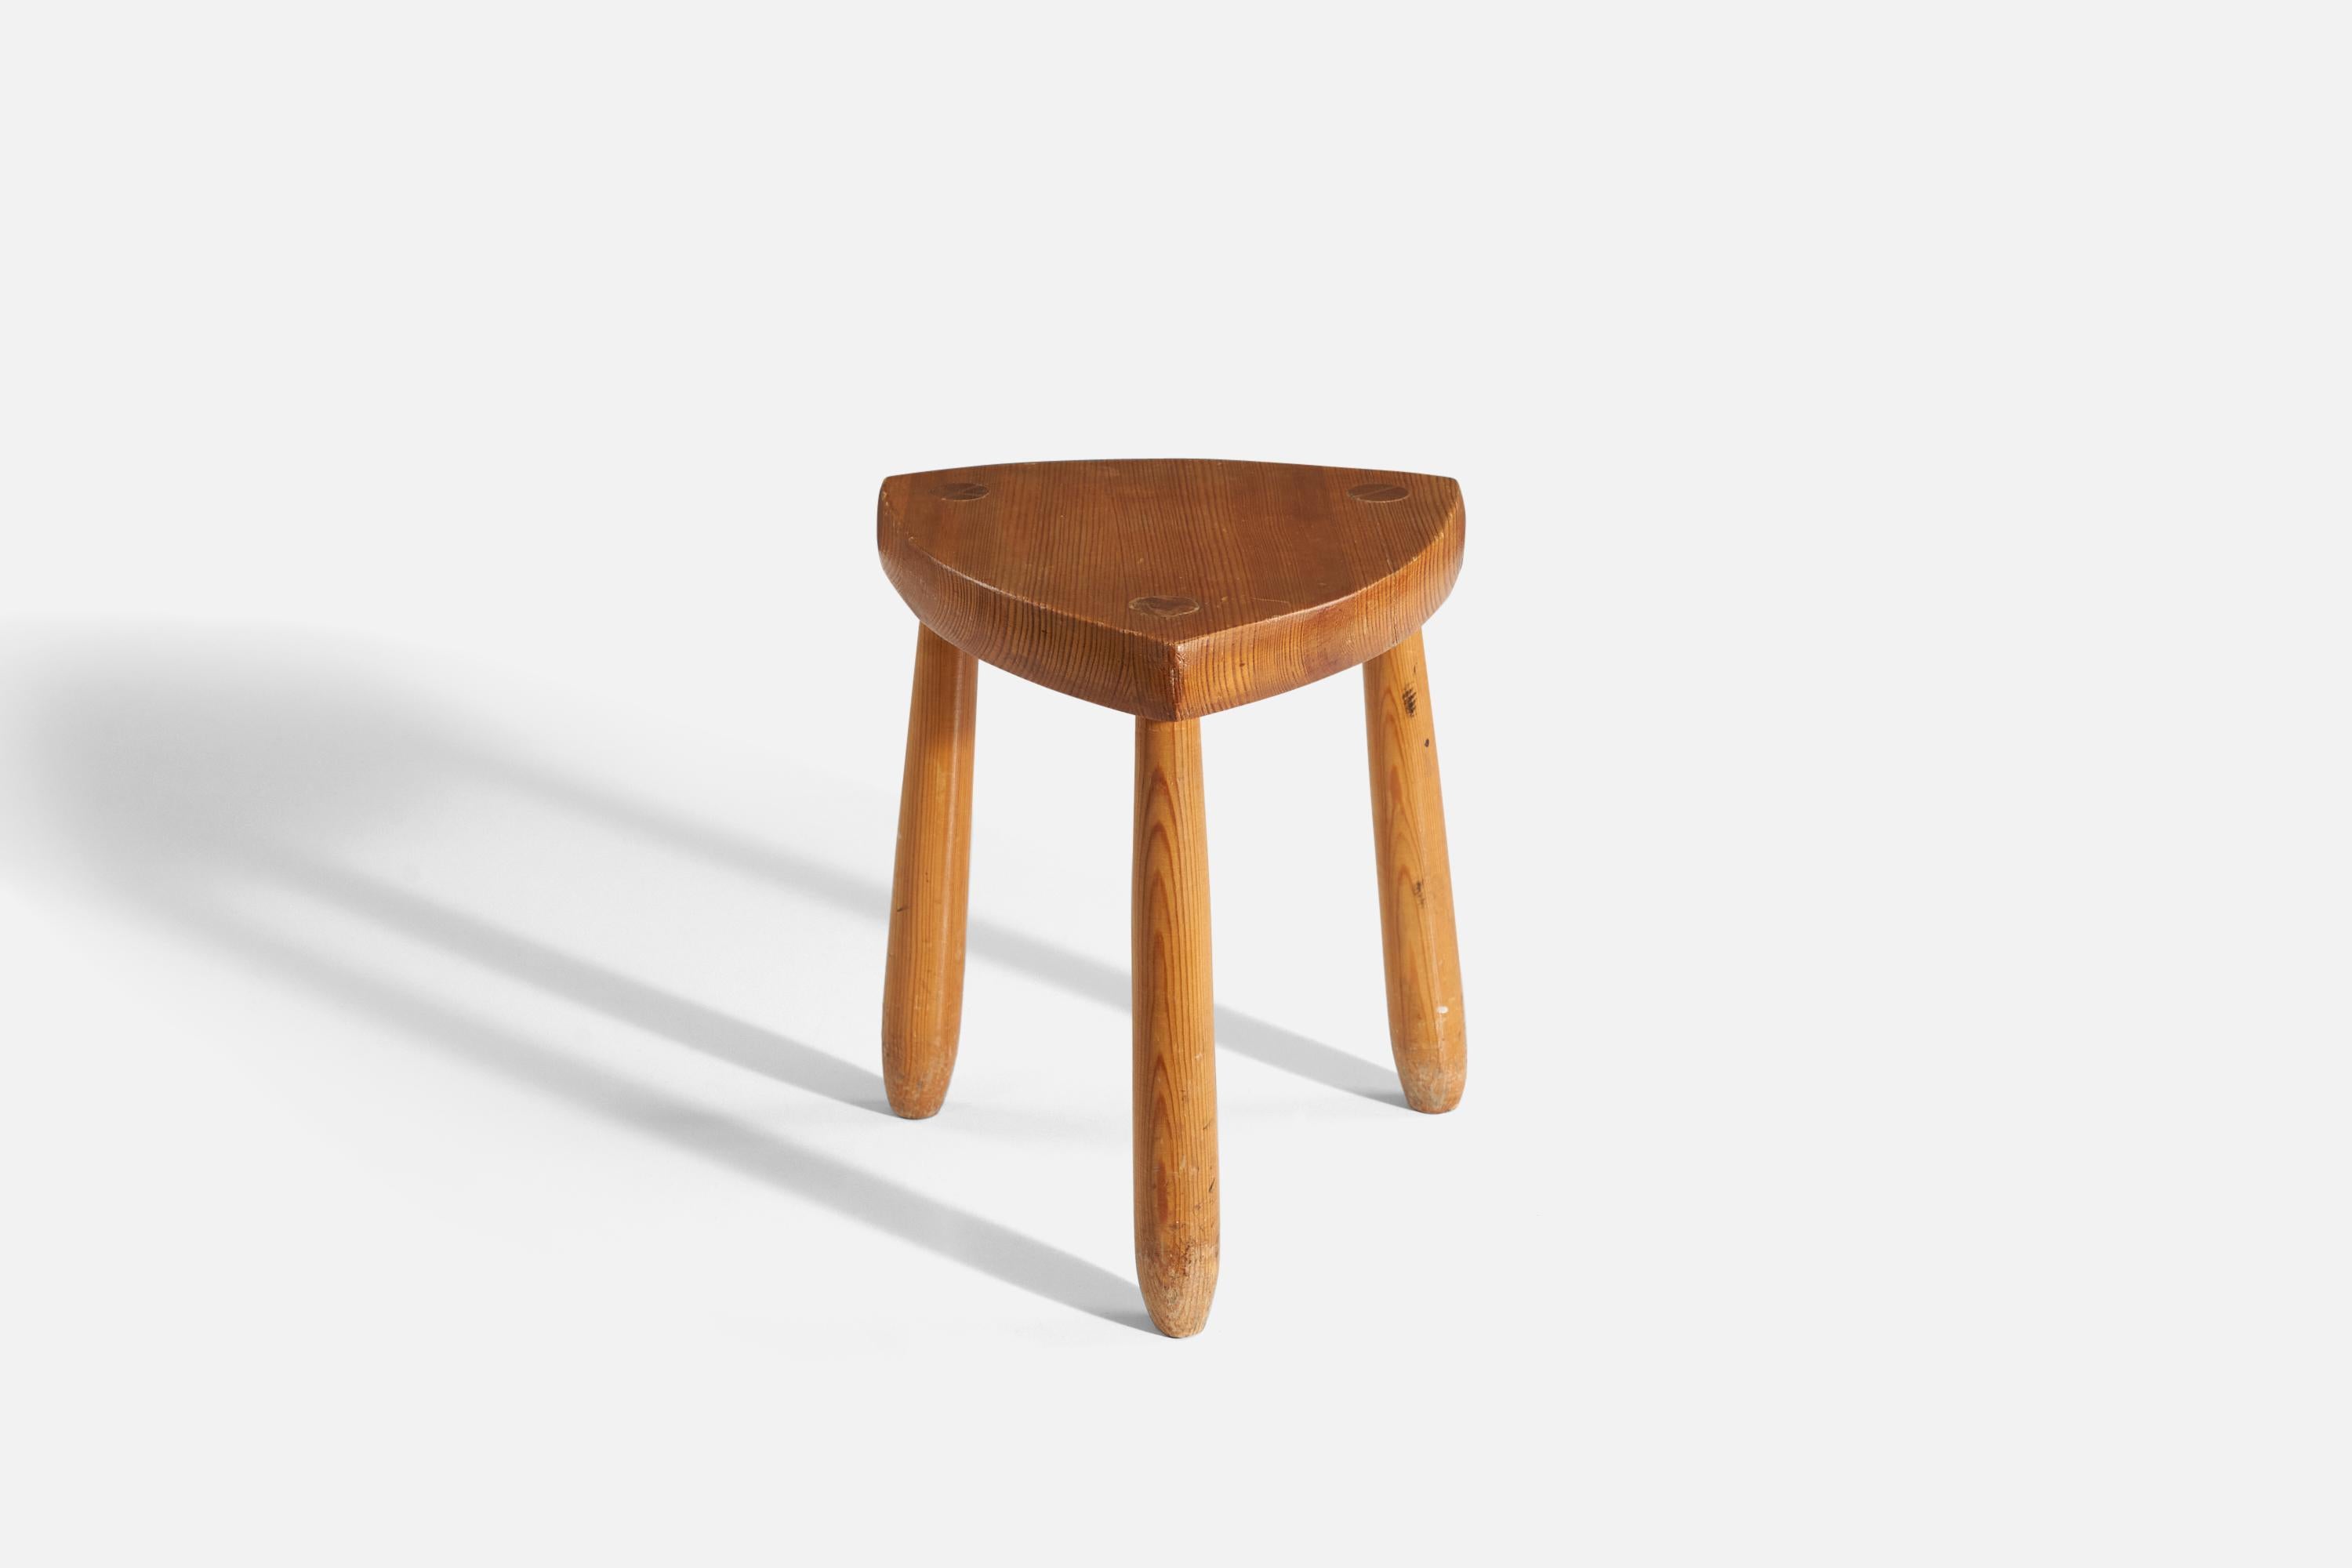 A solid pine wood stool produced in Sweden. Signed 